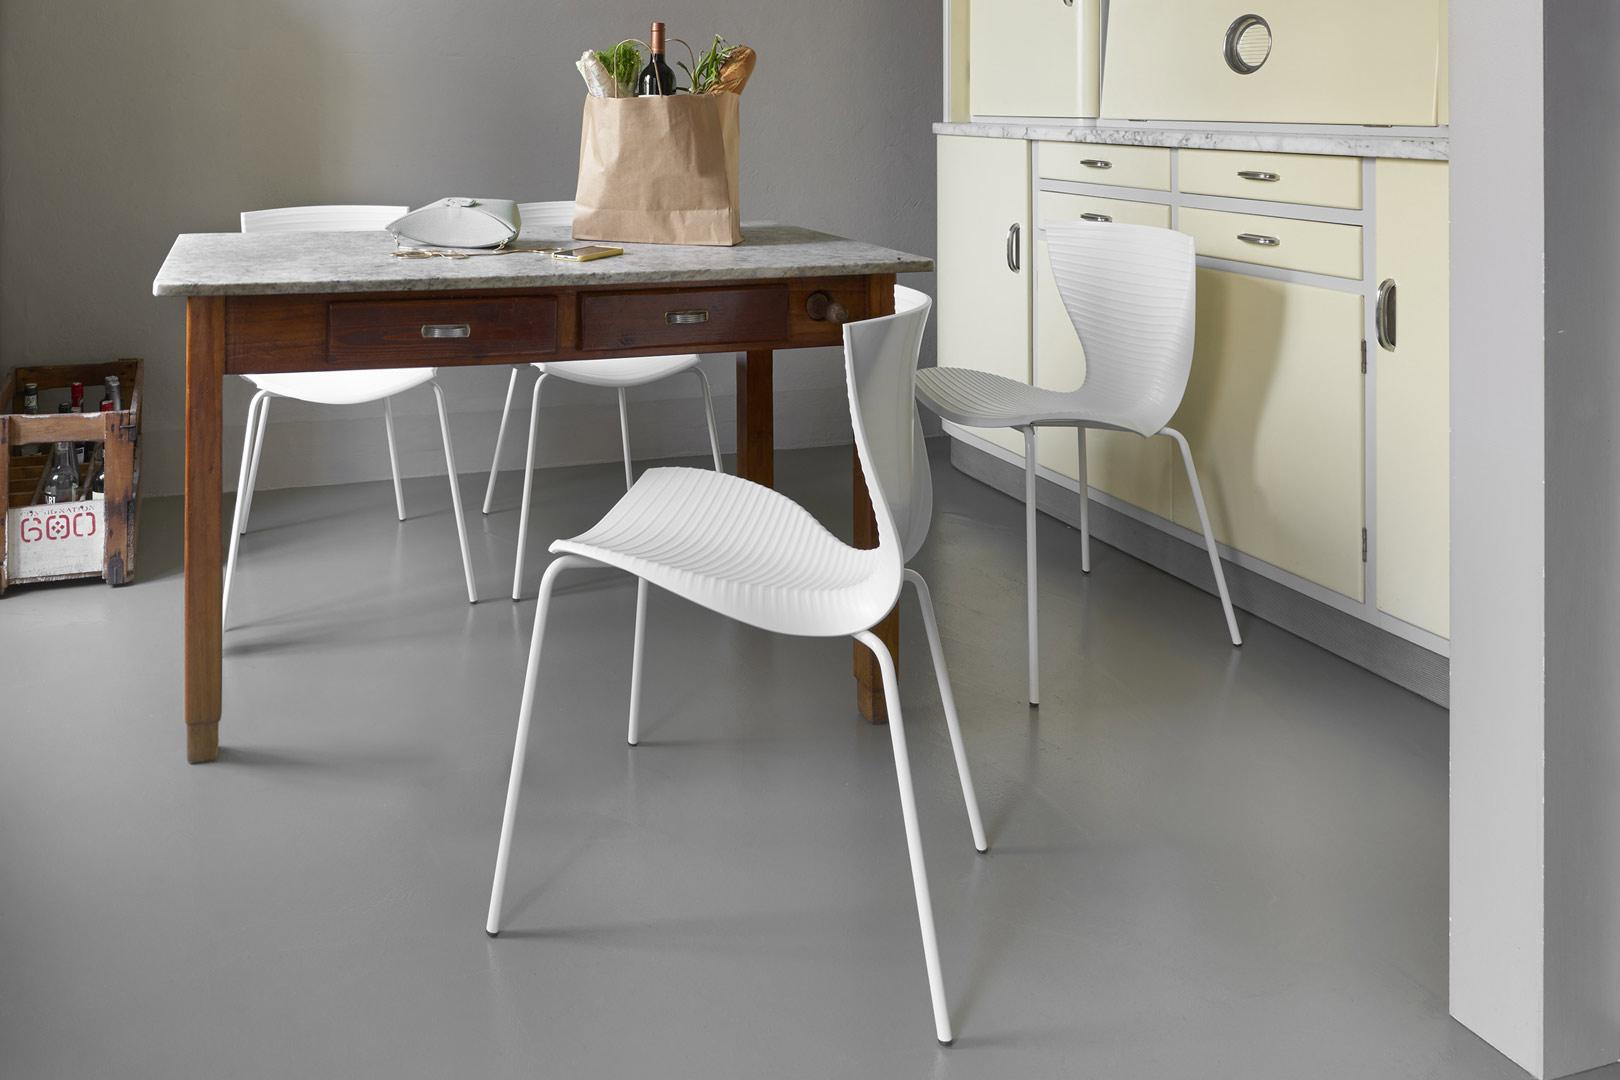 Gloria Chair by Marc Sadler
Dimensions: D 54 x W 56 x H 80 cm. Seat Height: 48 cm.
Materials: Polypropylene and steel chassis.
Weight: 6 kg.

Available in two different color options: white or black. This product is suitable for indoor and outdoor